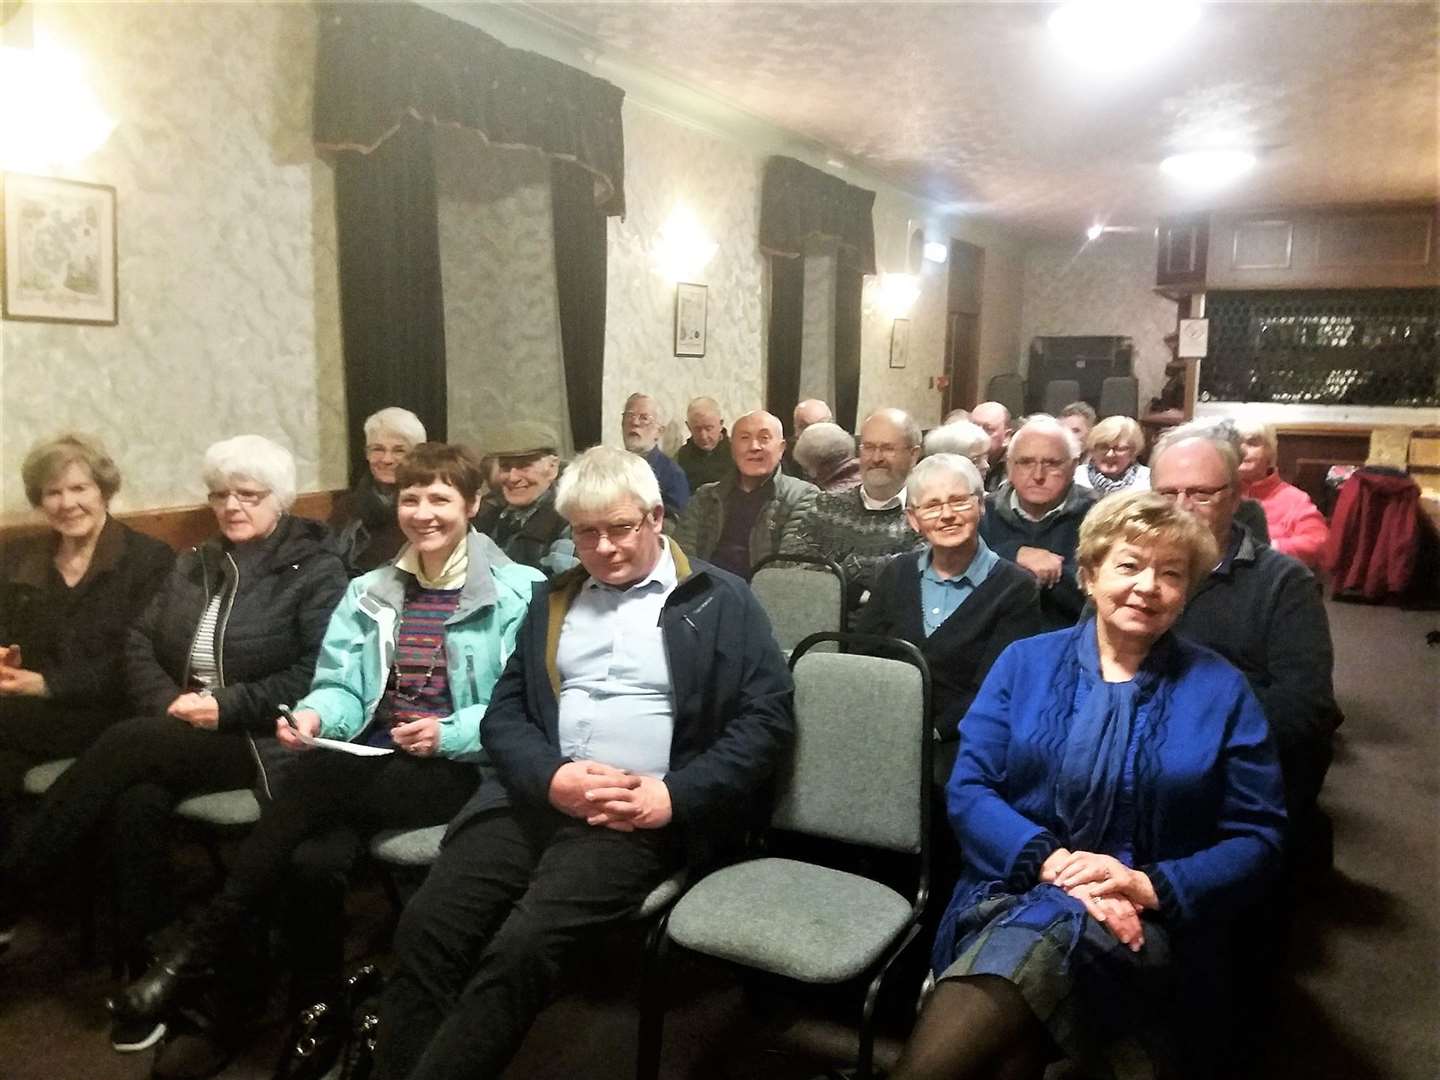 CFHS audience at the Nethercliffe Hotel in March 2020 just before Covid hit.